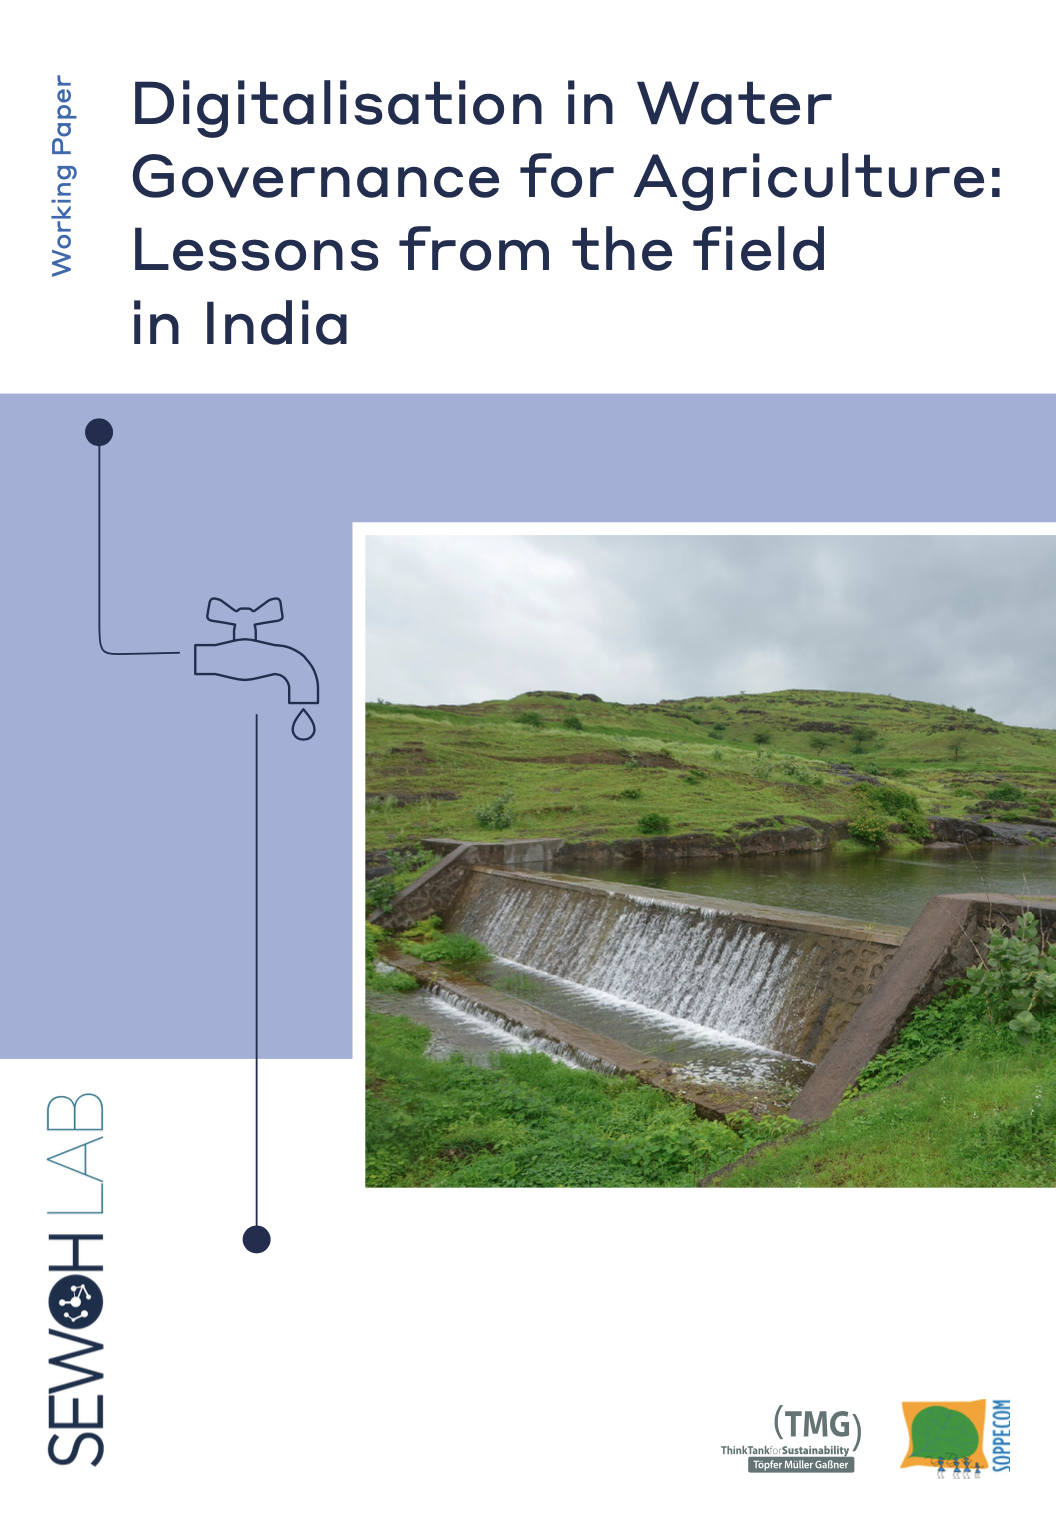 Digitalisation in Water Governance for Agriculture: Lessons from the field in India